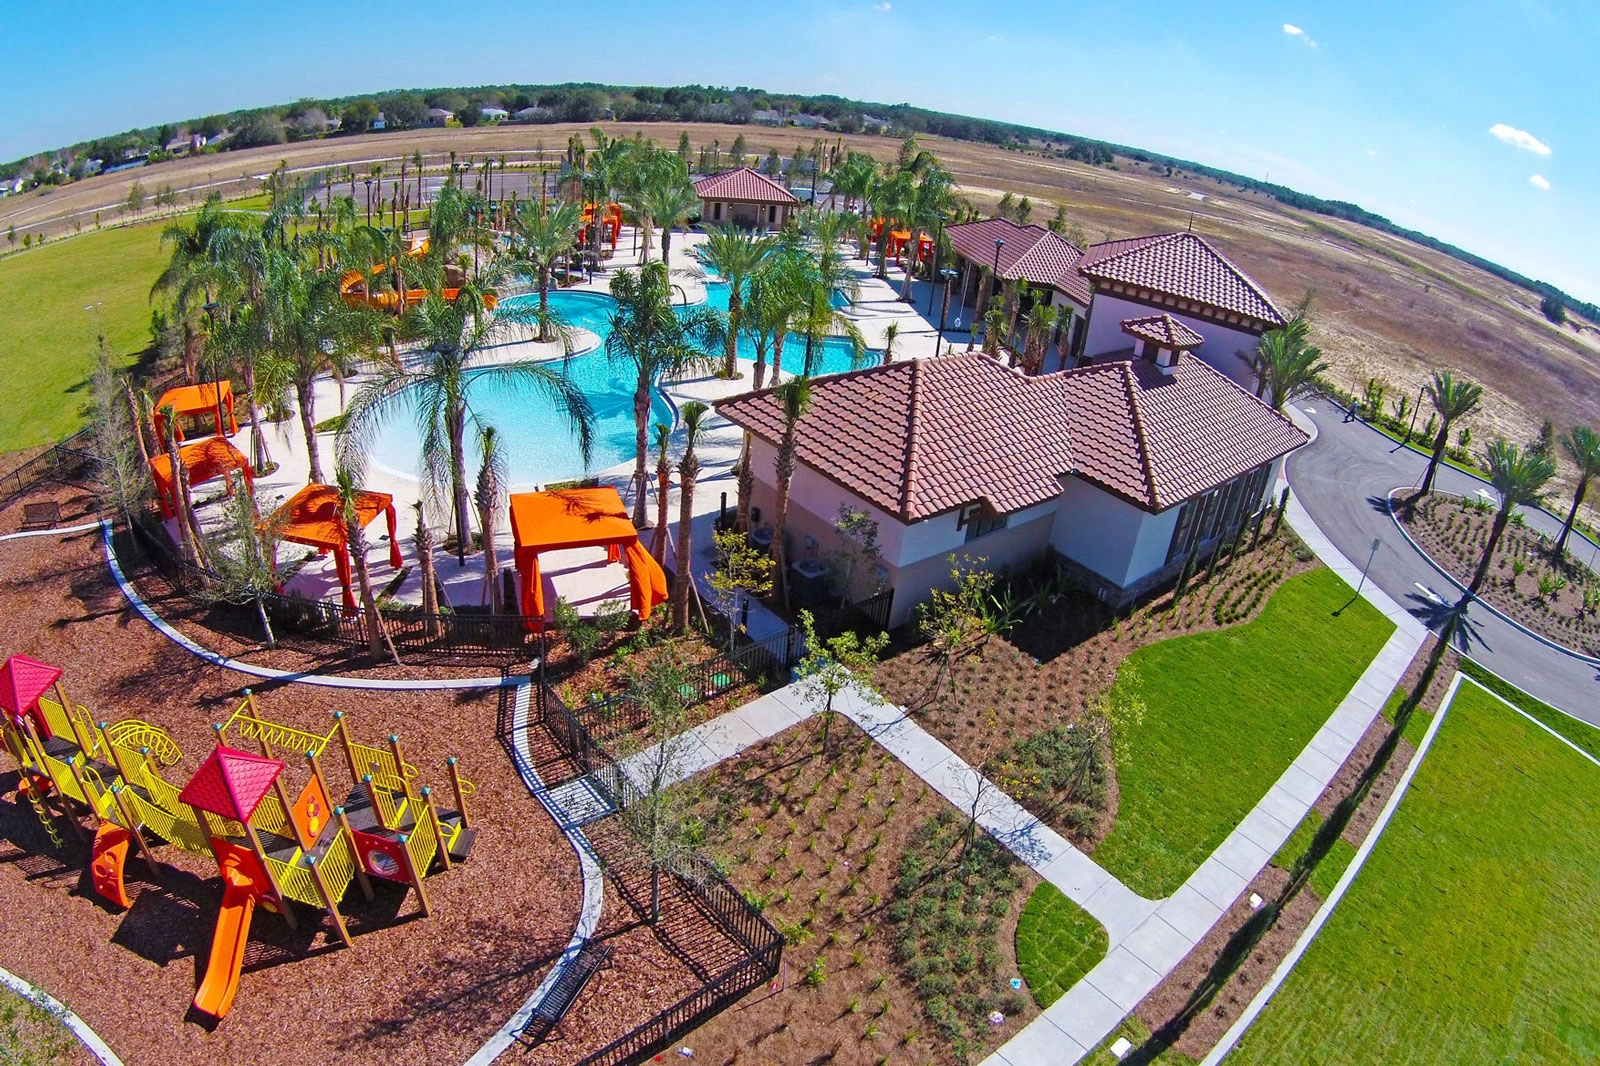 Overhead shot of Solterra Resort clubhouse and pool